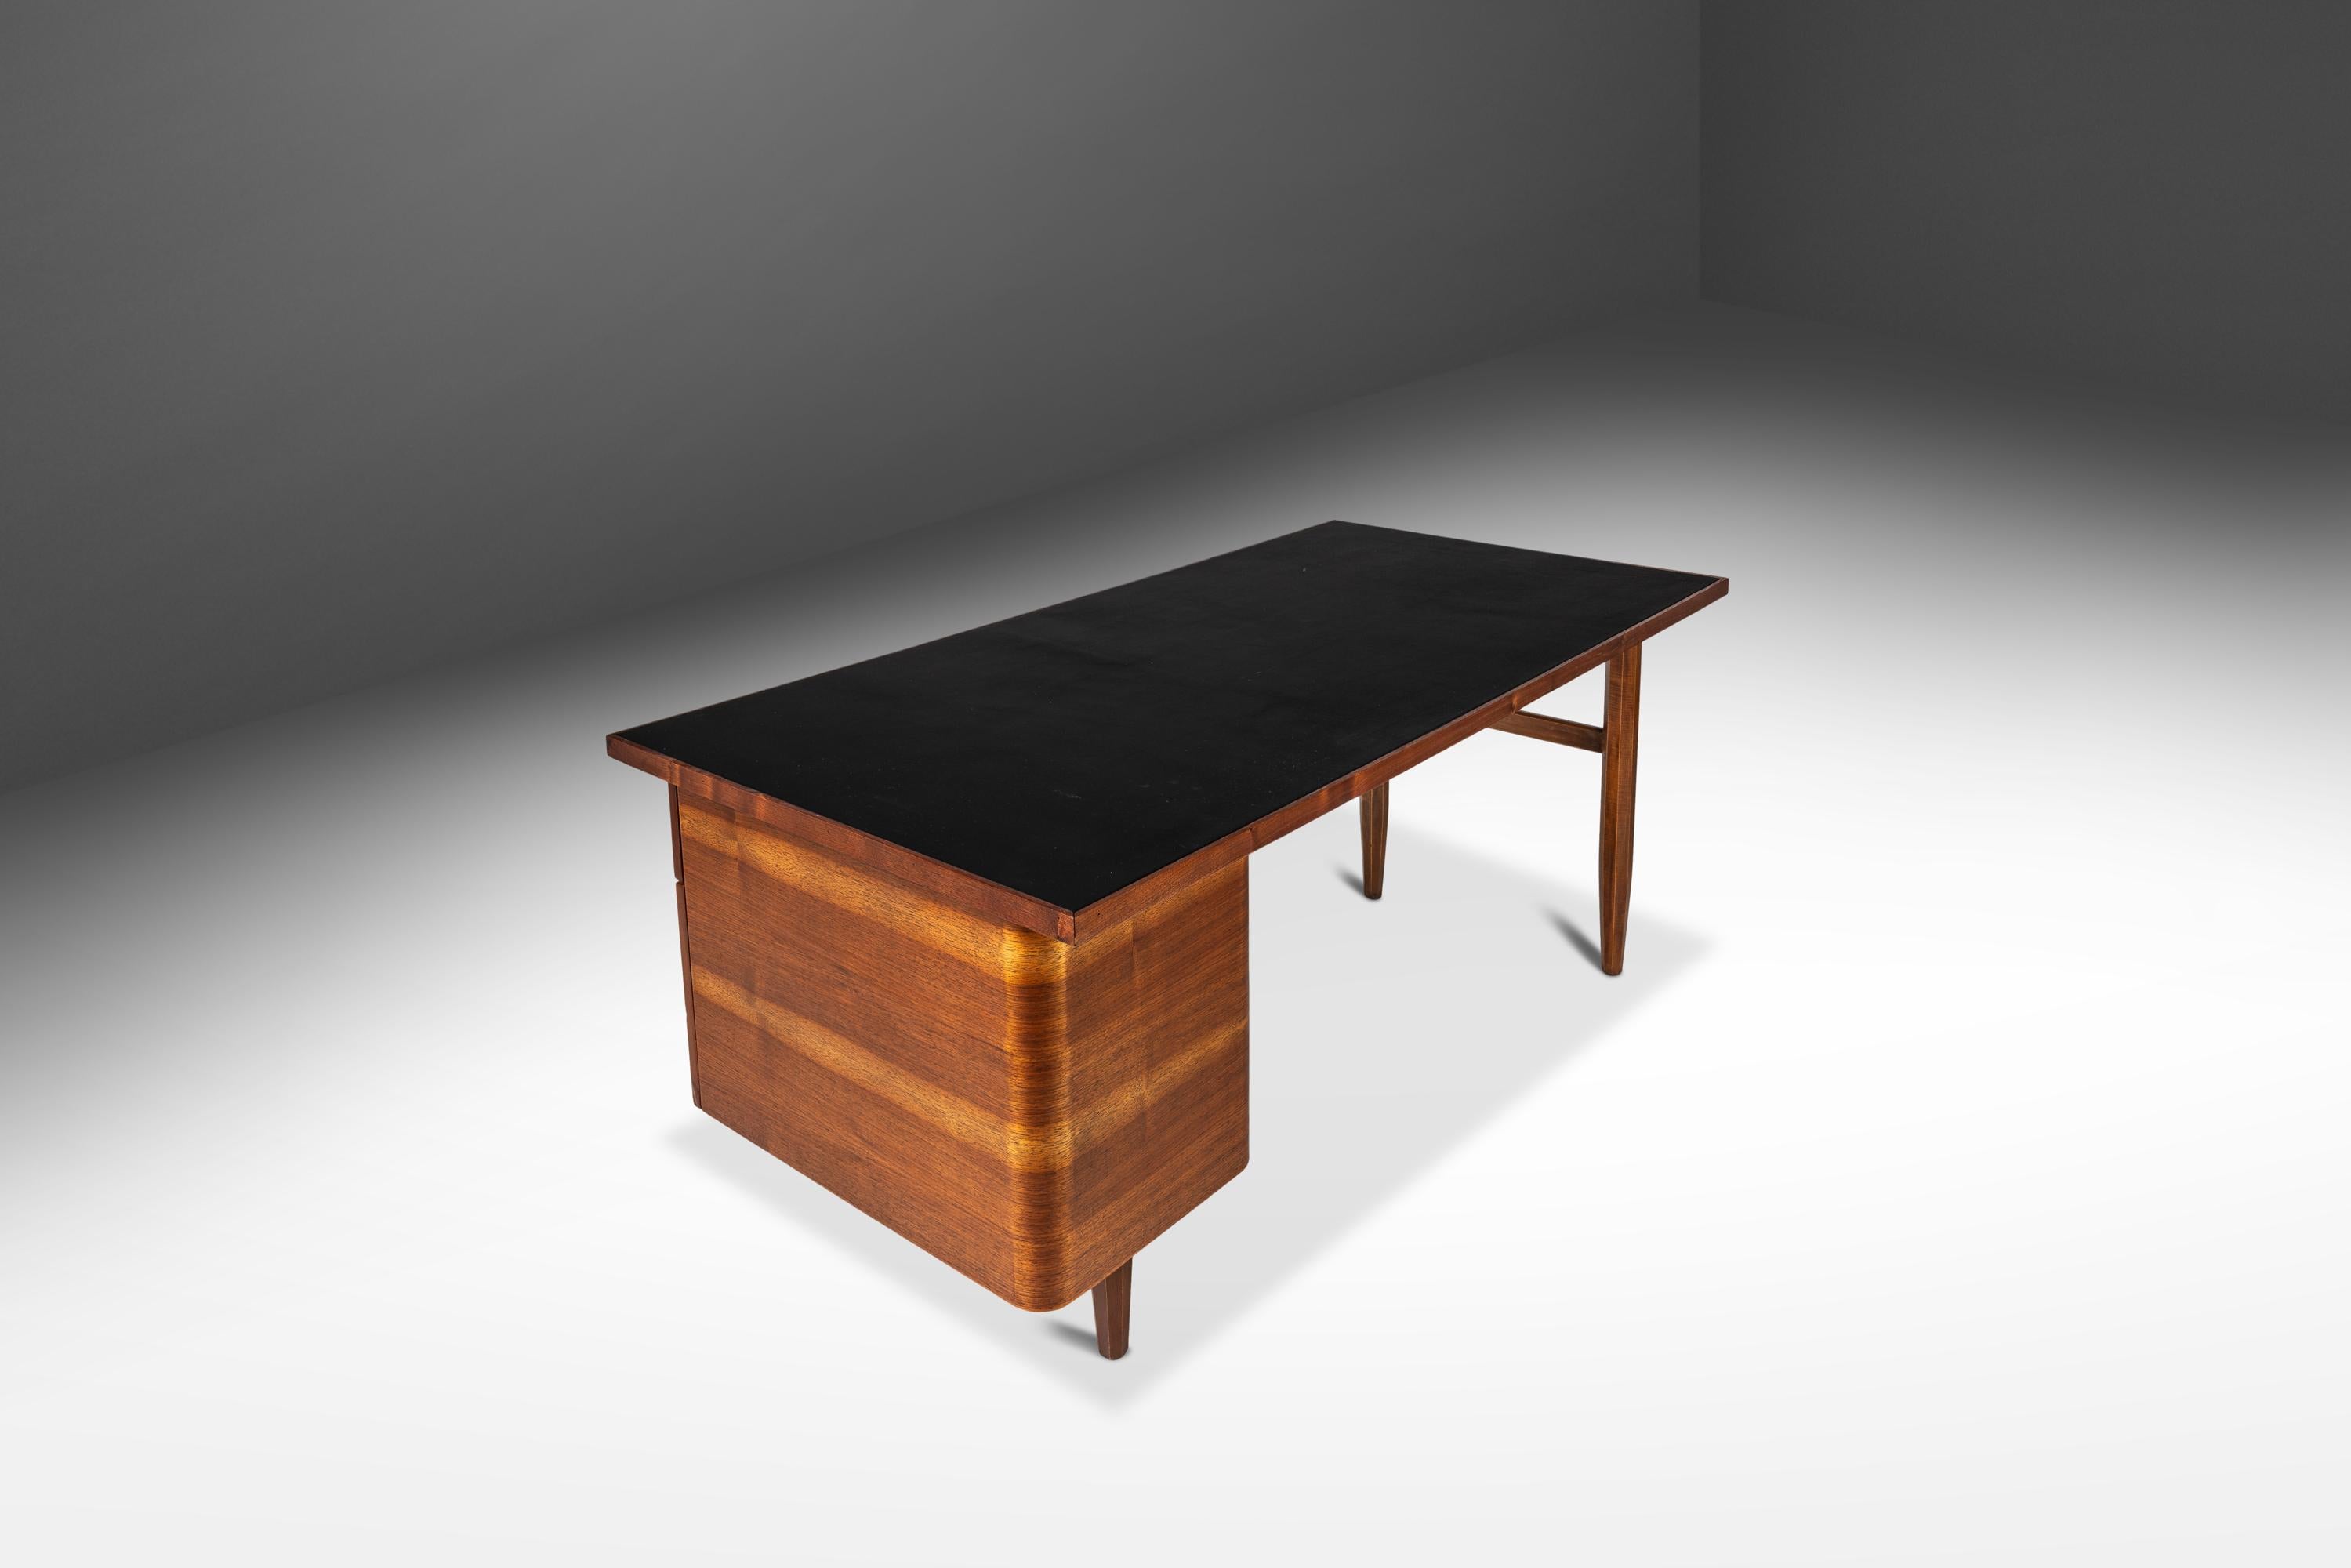 Restored Mid-Century Modern Writers Desk in Walnut with Leather Top, USA, 1960's For Sale 3